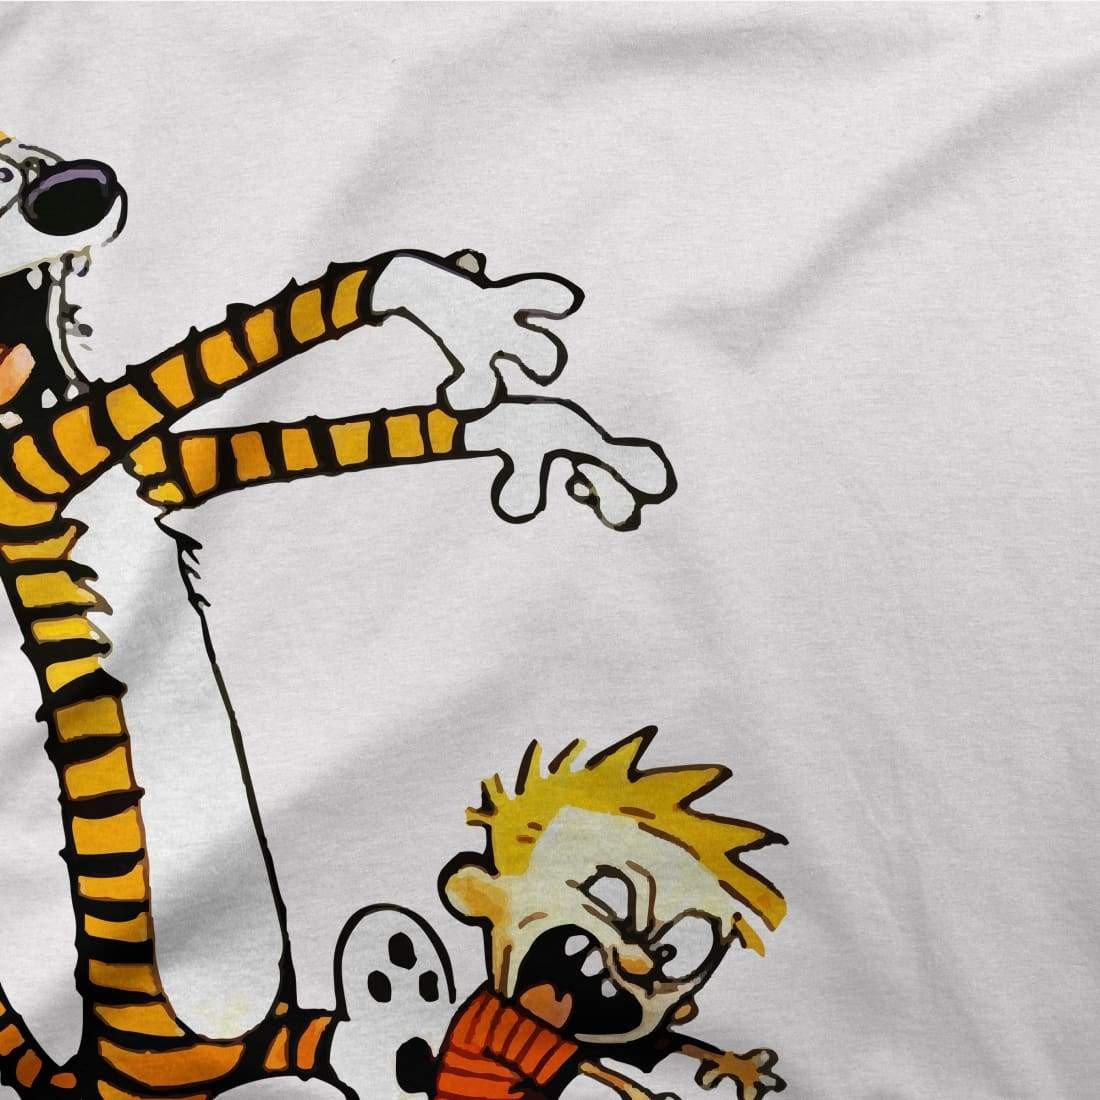 Calvin and Hobbes Playing Zombies T-Shirt